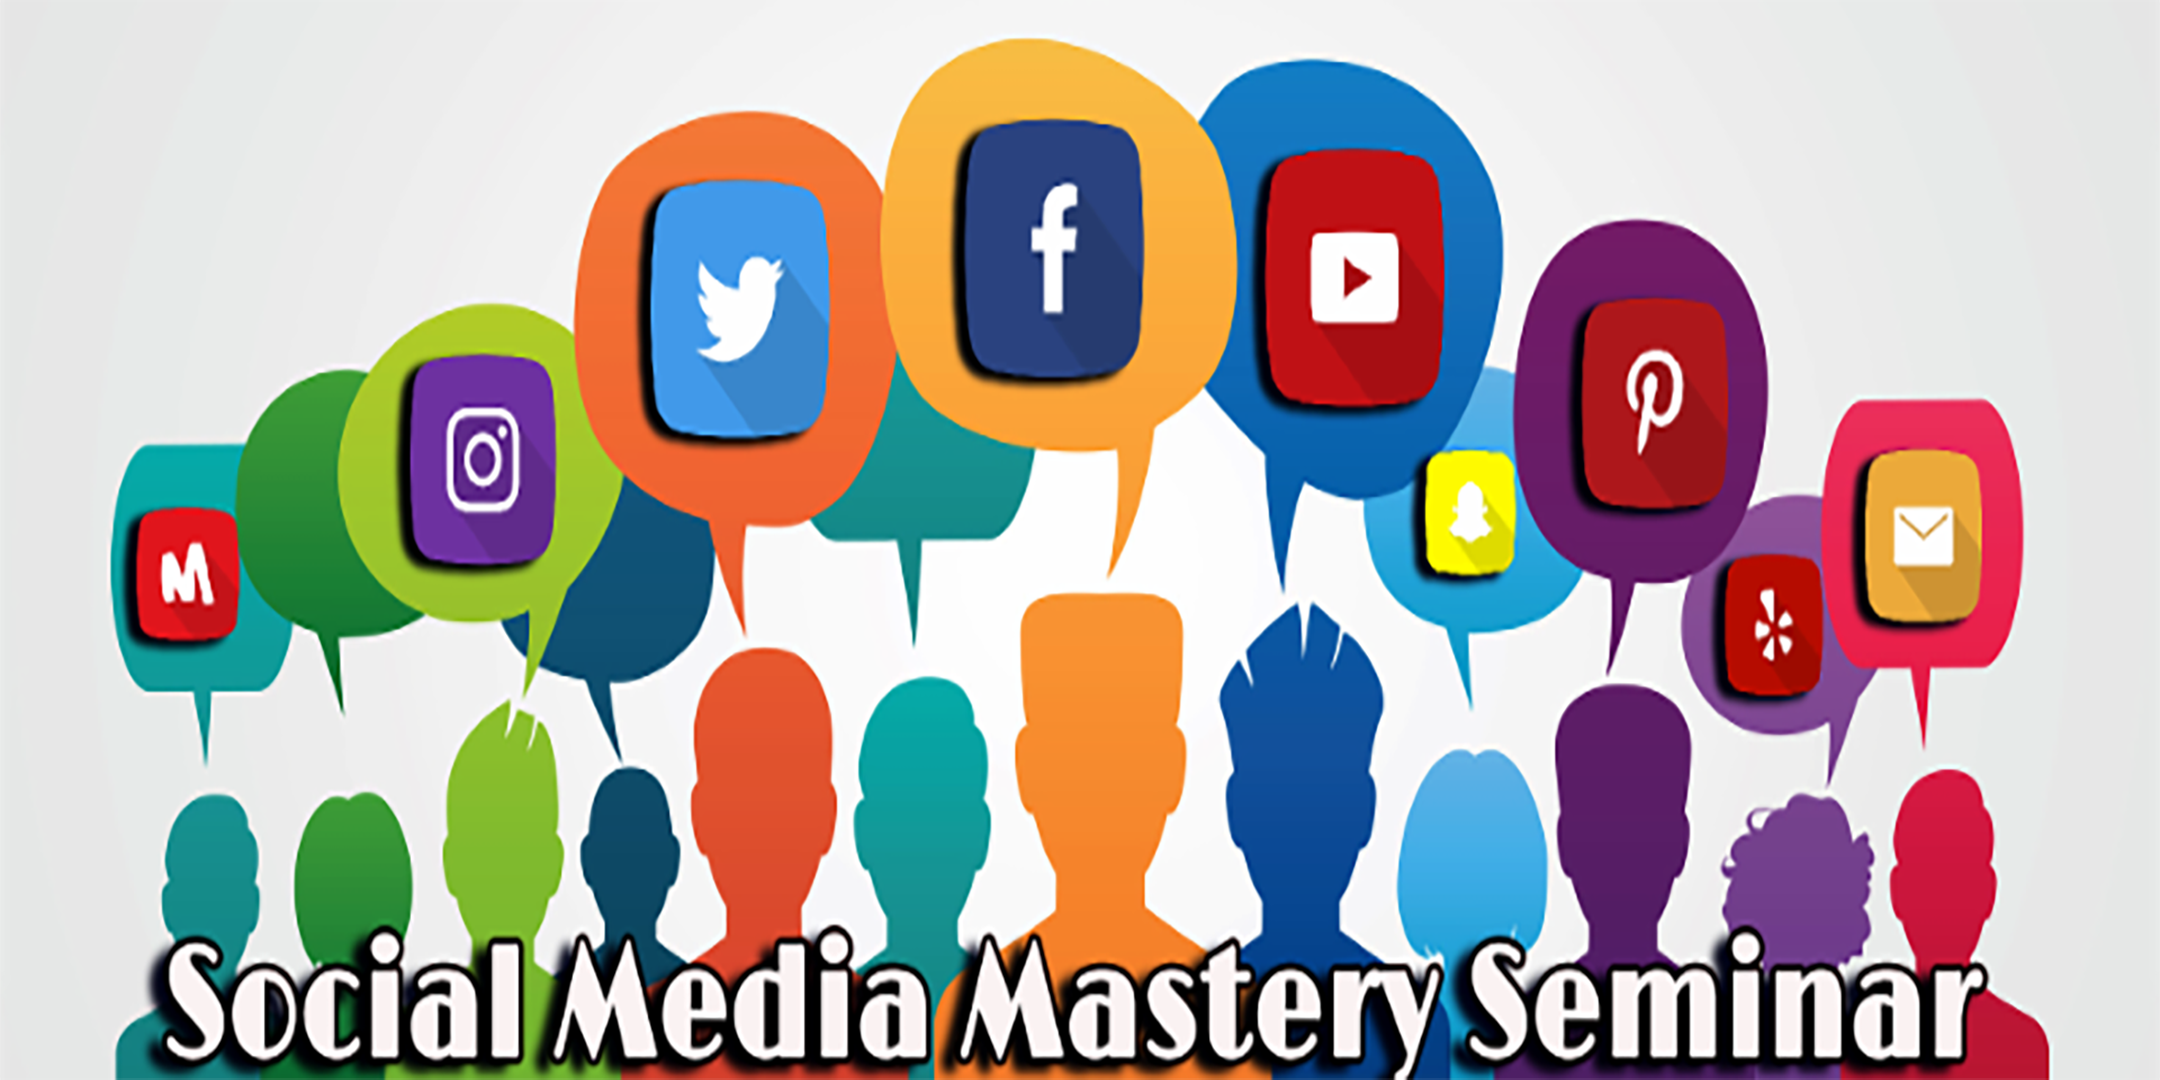 Social Media Mastery Seminar, a Doral Chamber of Commerce event.